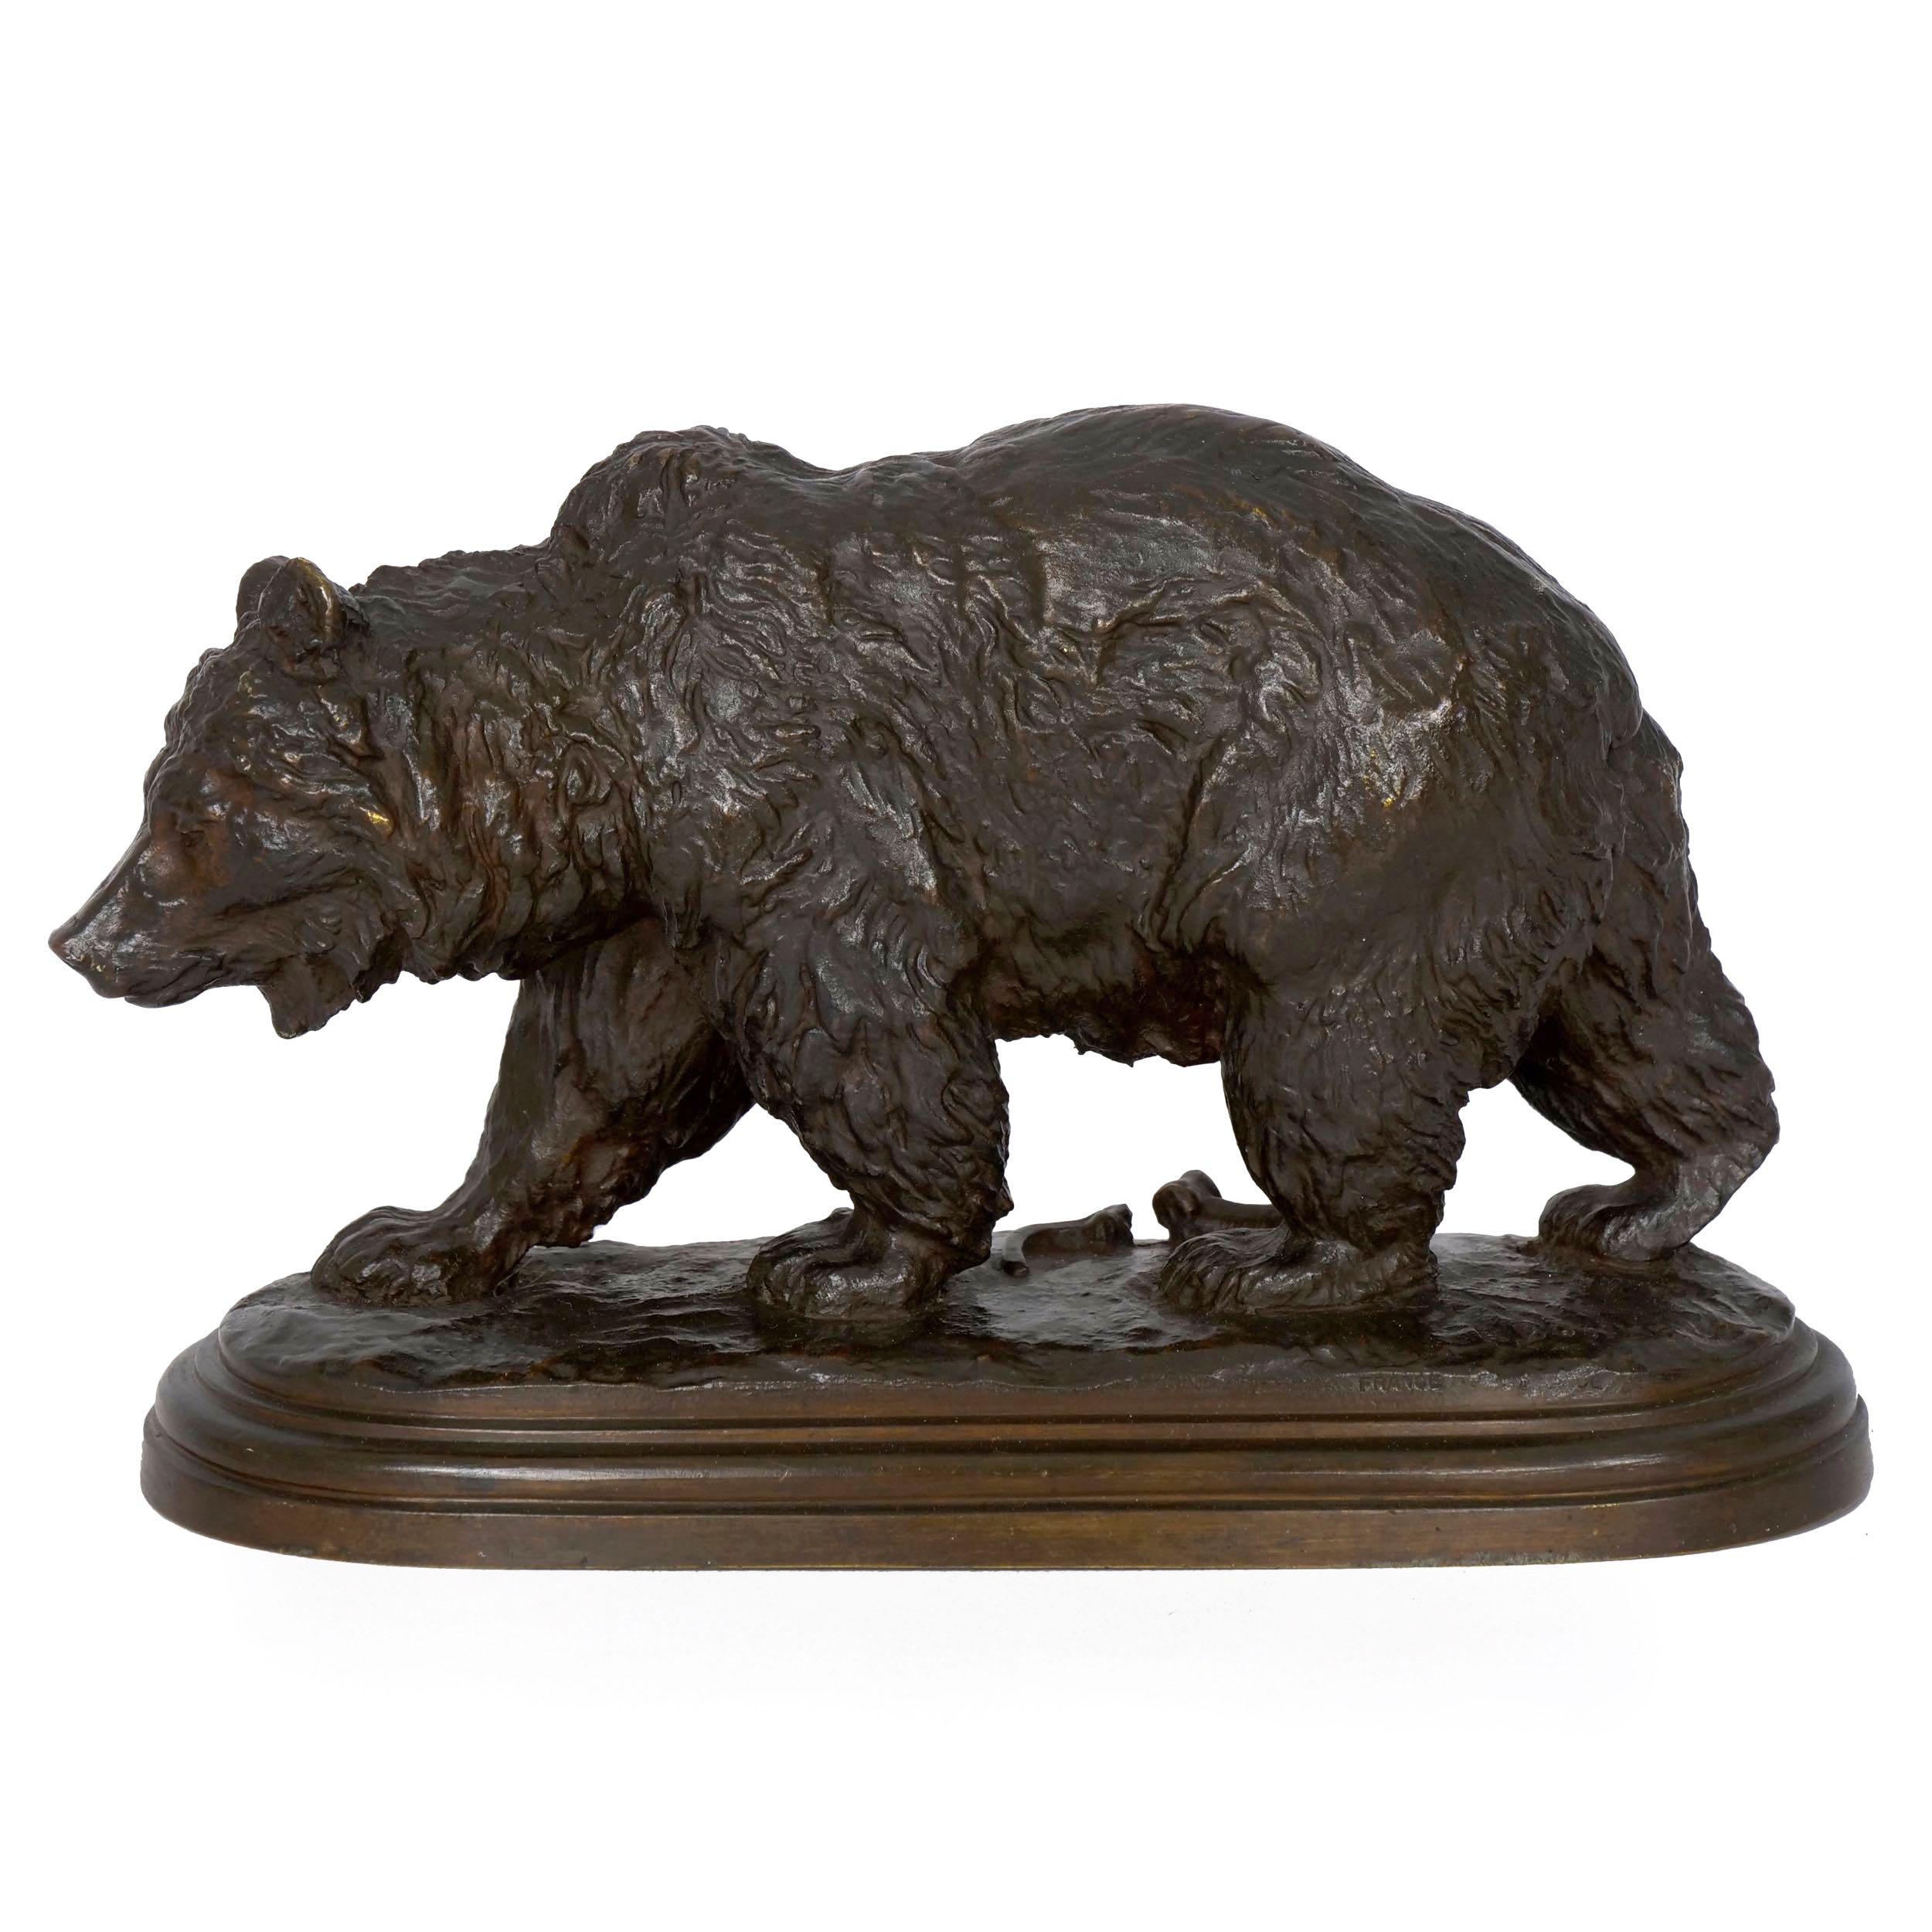 With a complex original patina with varying hues of brown, red-oxide and traces of black, this sculpture captures the slow movements of a sleepy bear as he trudges across a naturalistic base over scattered broken bones. It was cast by the Hippolyte